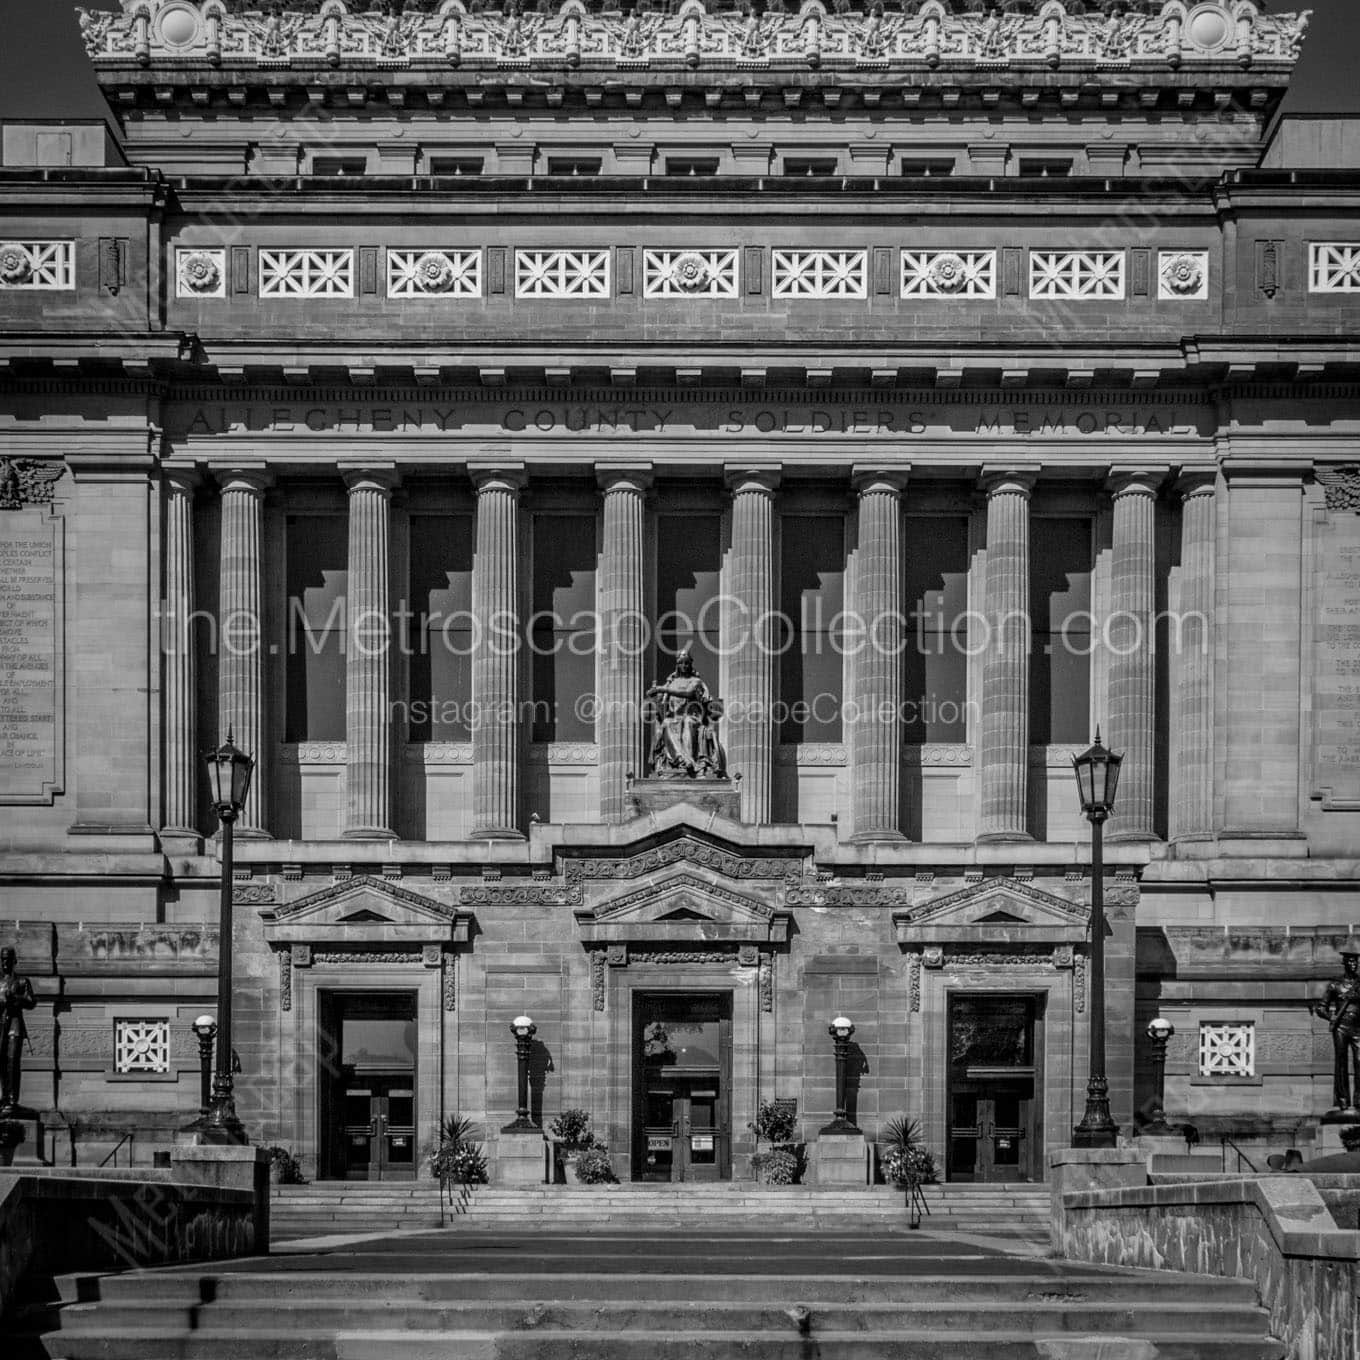 allegheny county soldiers memorial Black & White Office Art